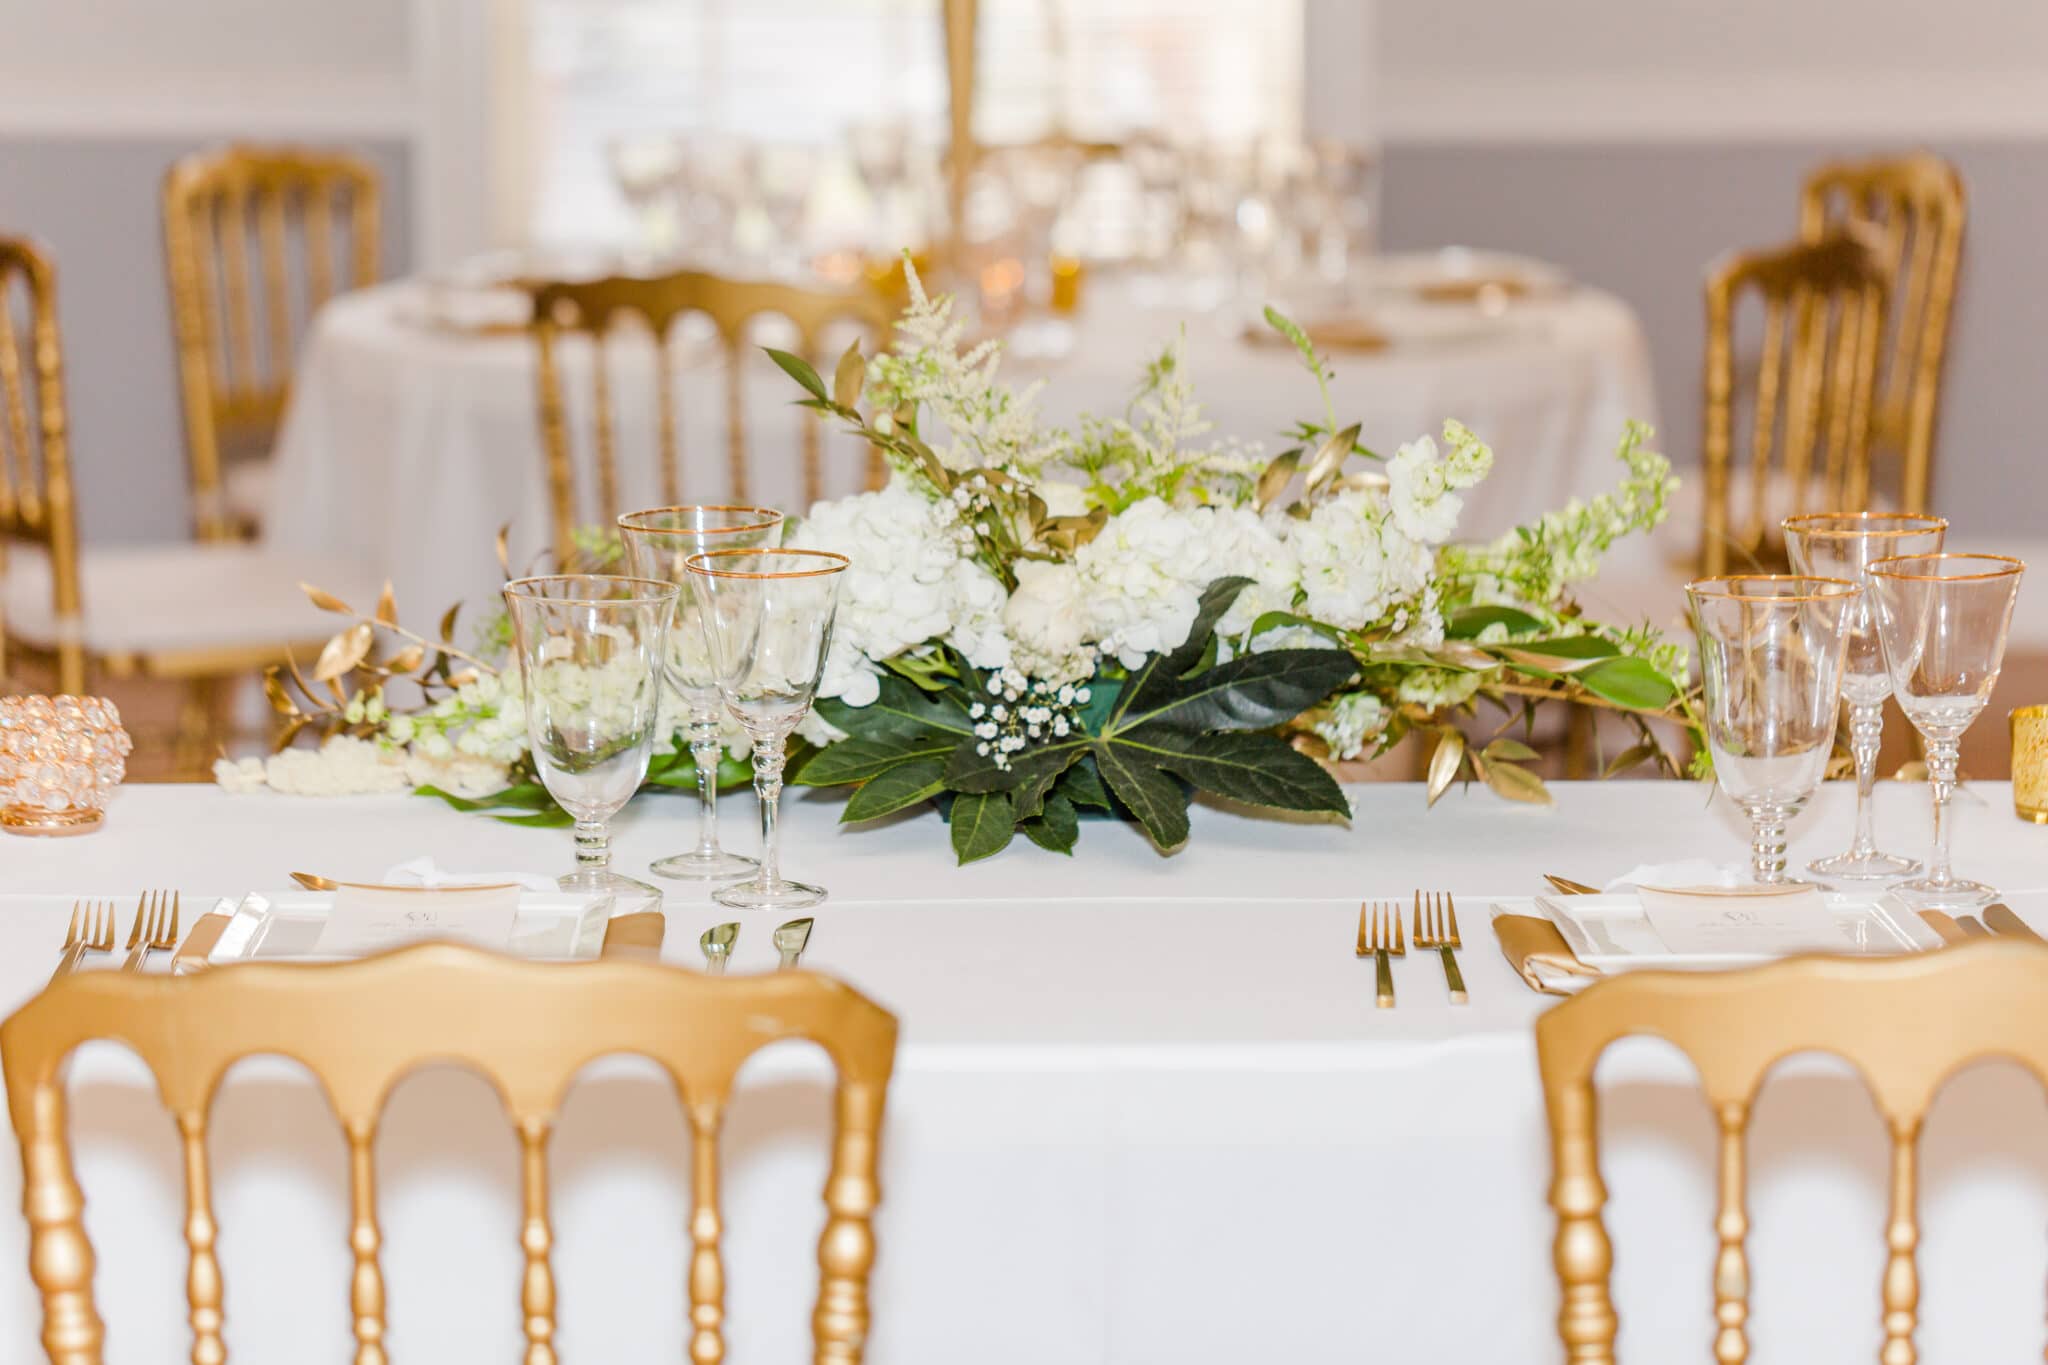 the flower arrangement and gold rimmed glasses on the sweetheart table